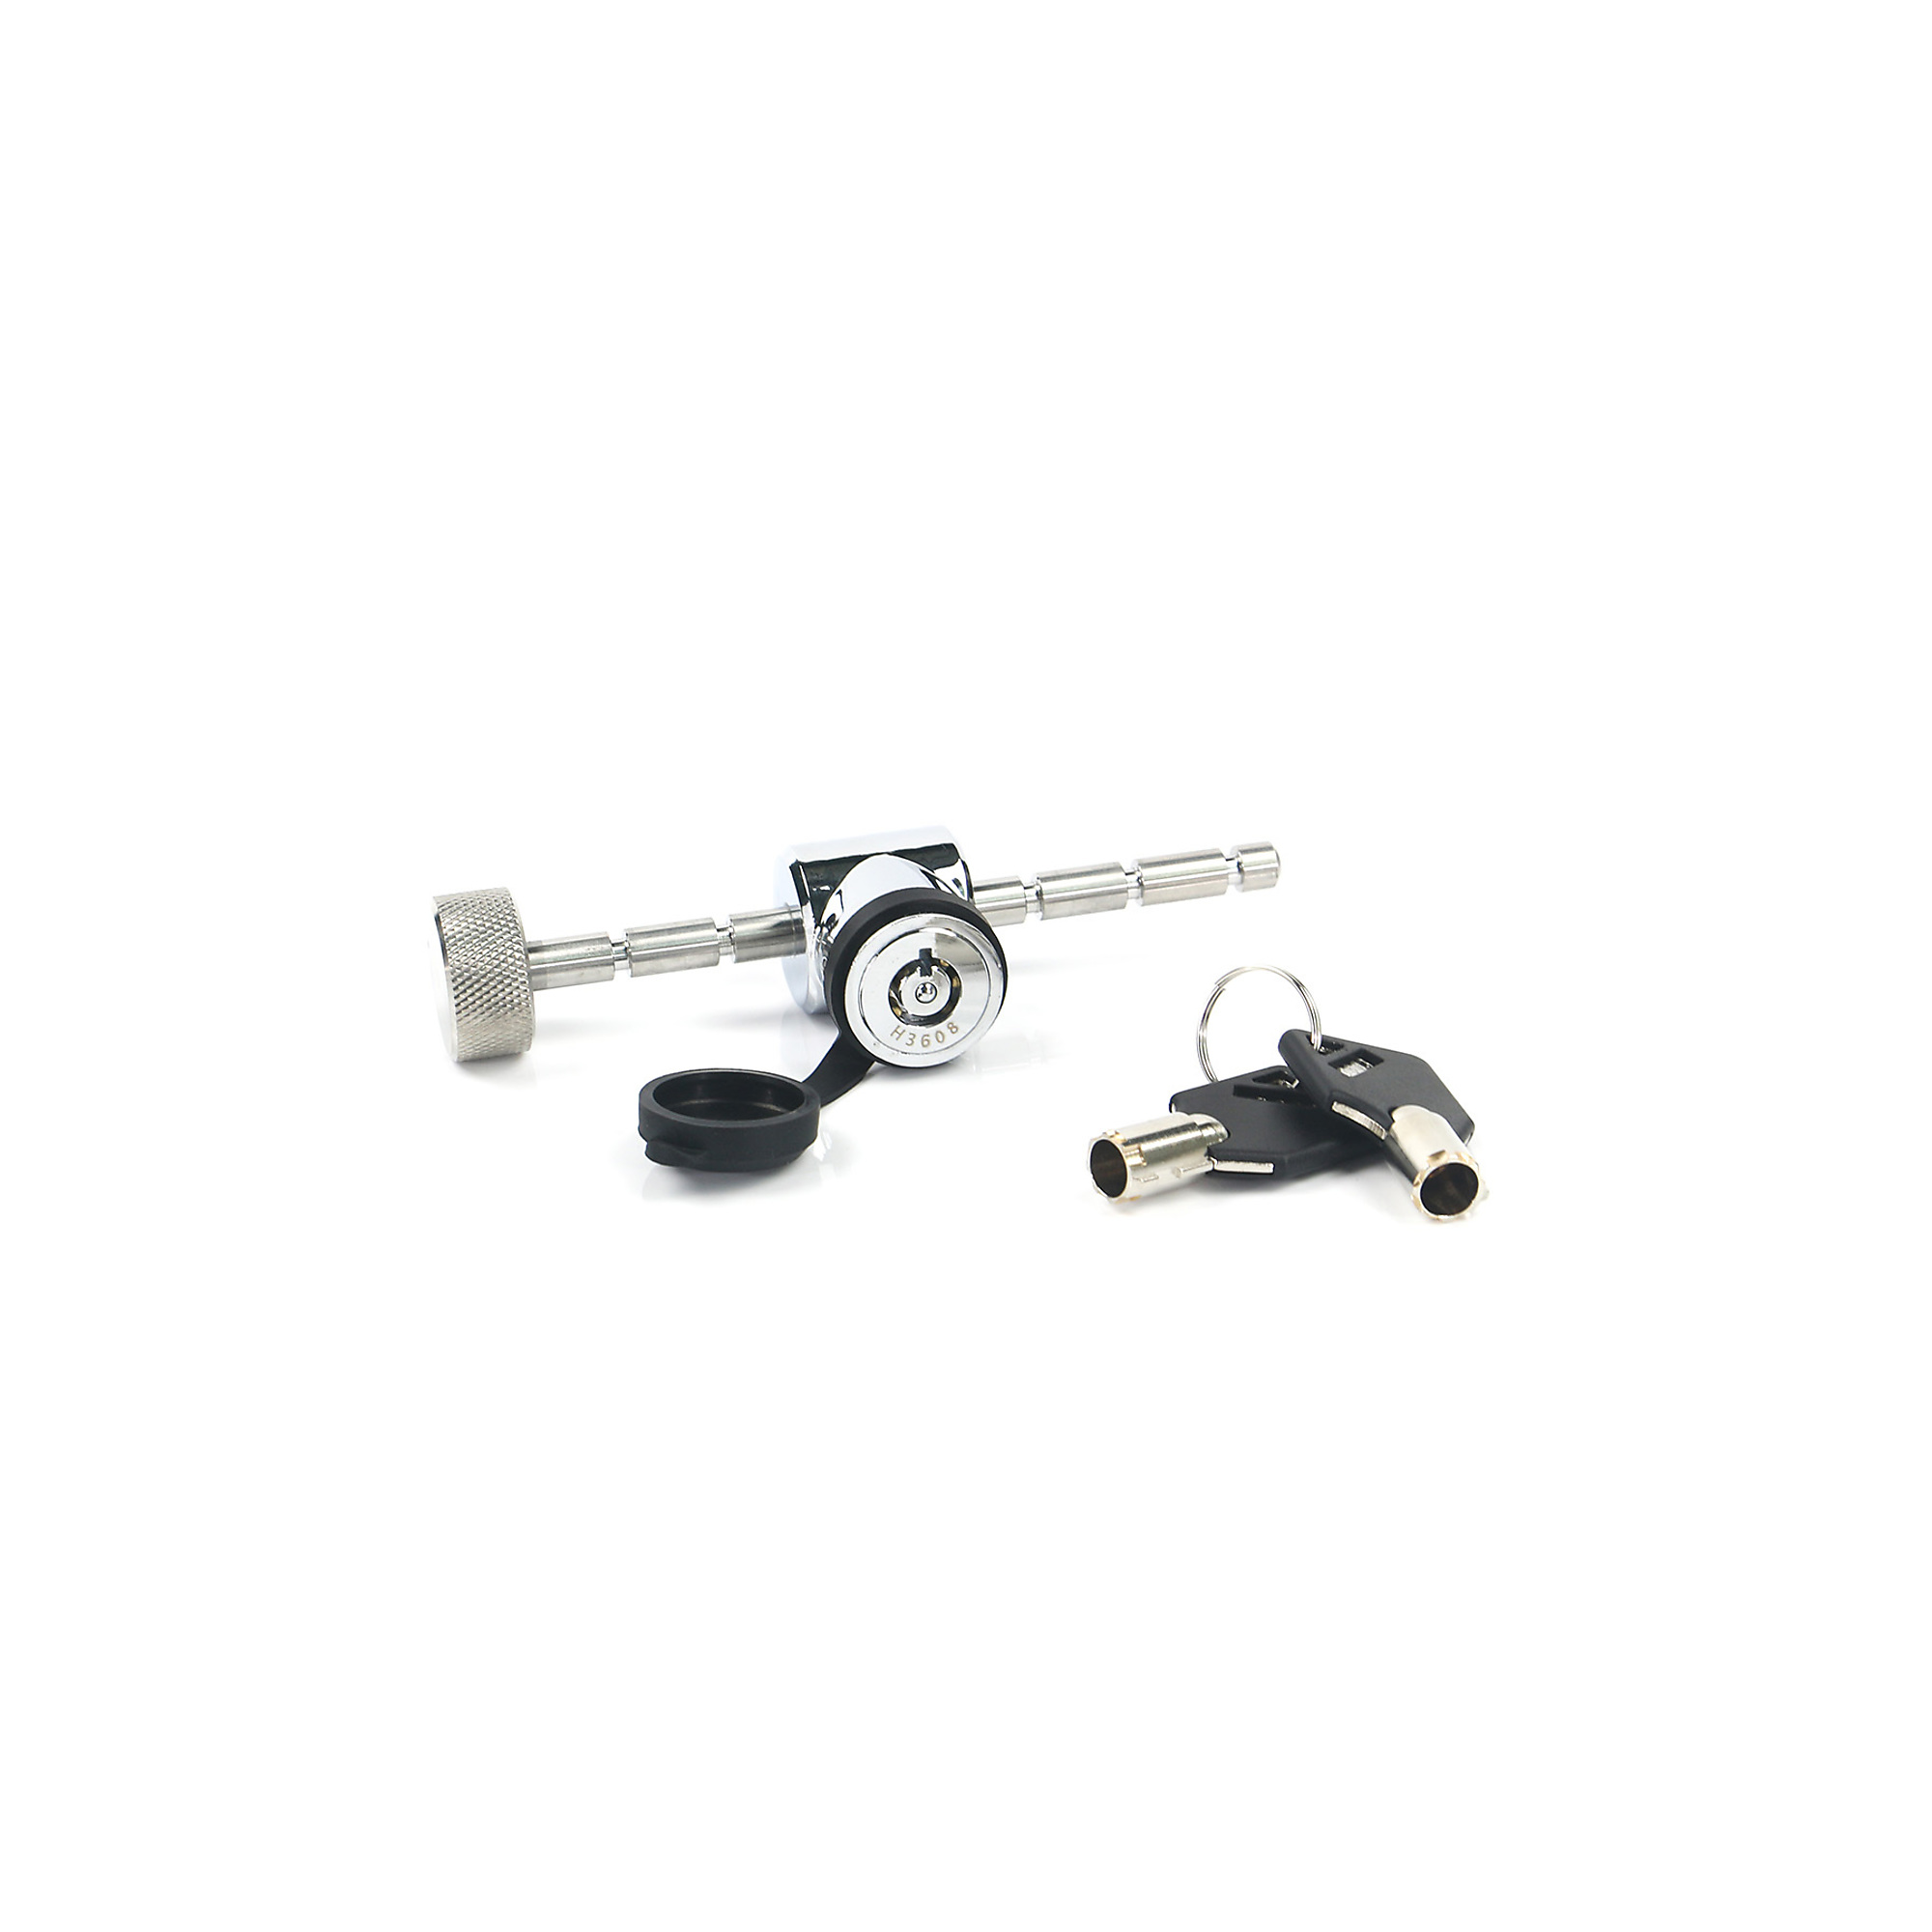 Weigh-Safe, Adjust Coupler Latch Lock - SS KEYED, Gross Towing Weight 3,500 lb, Class Rating N/A, Model WS11